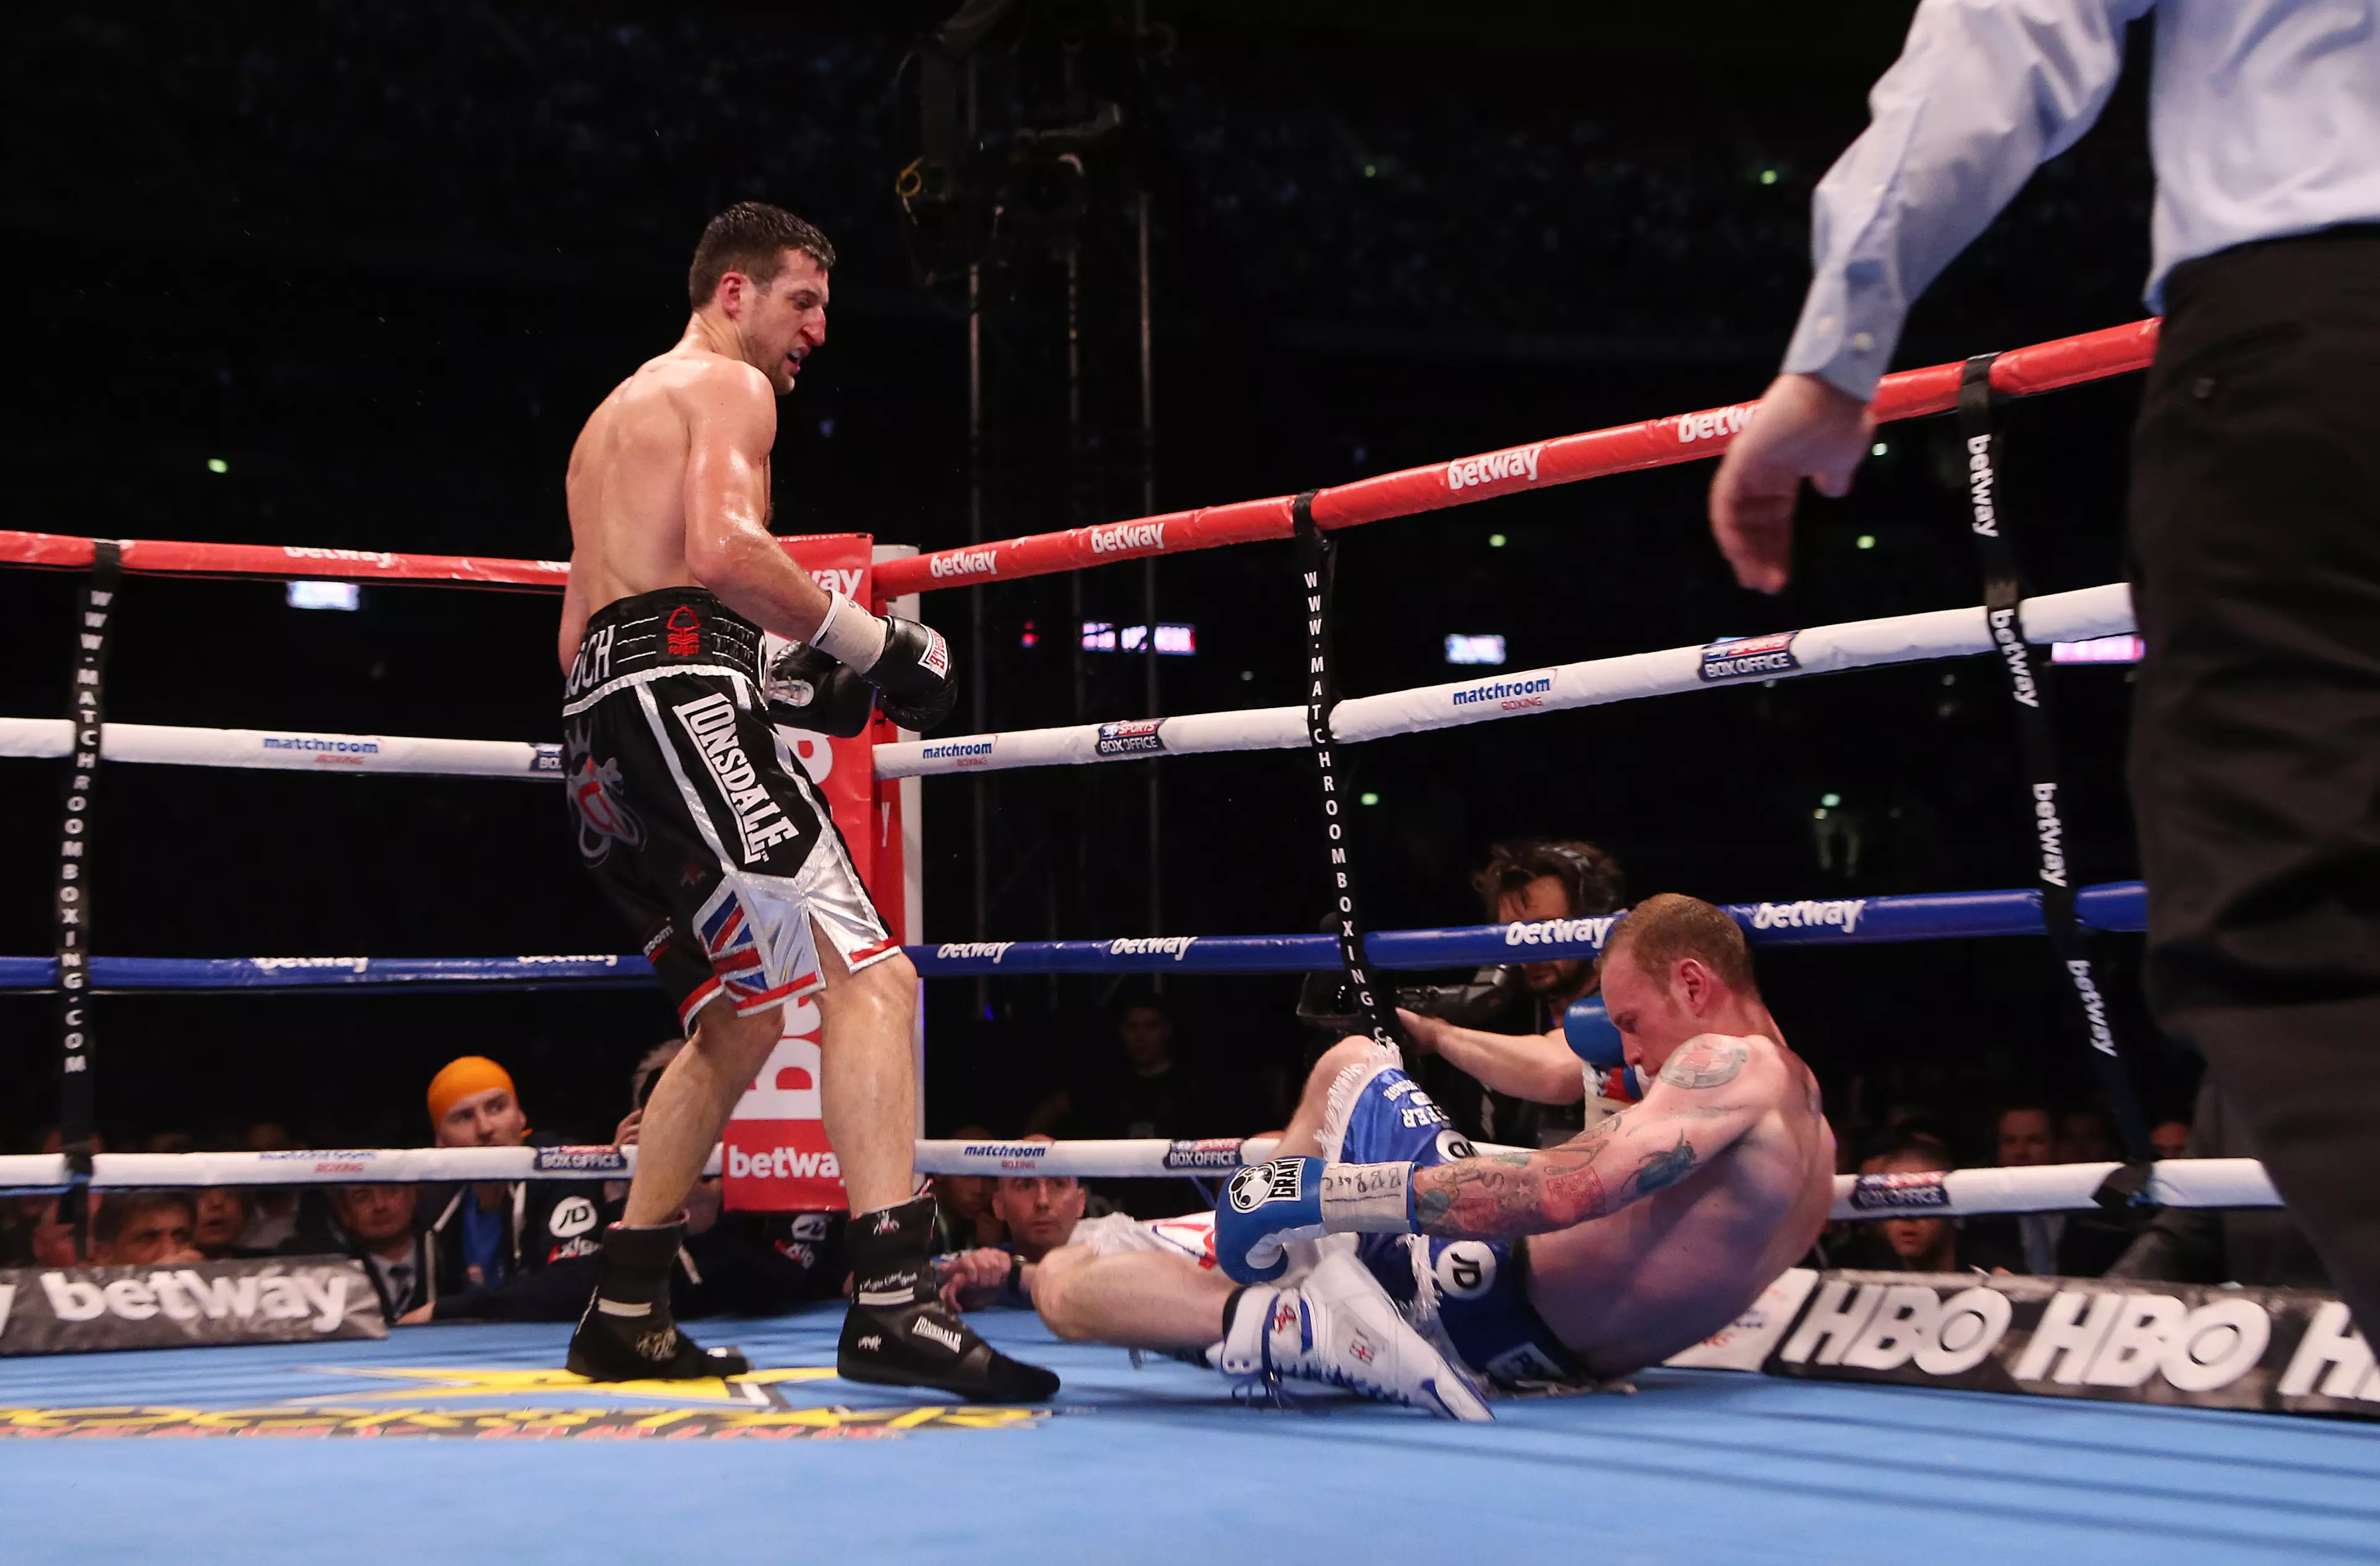 Froch was a great boxer, but is he decent scientist? Probably not.